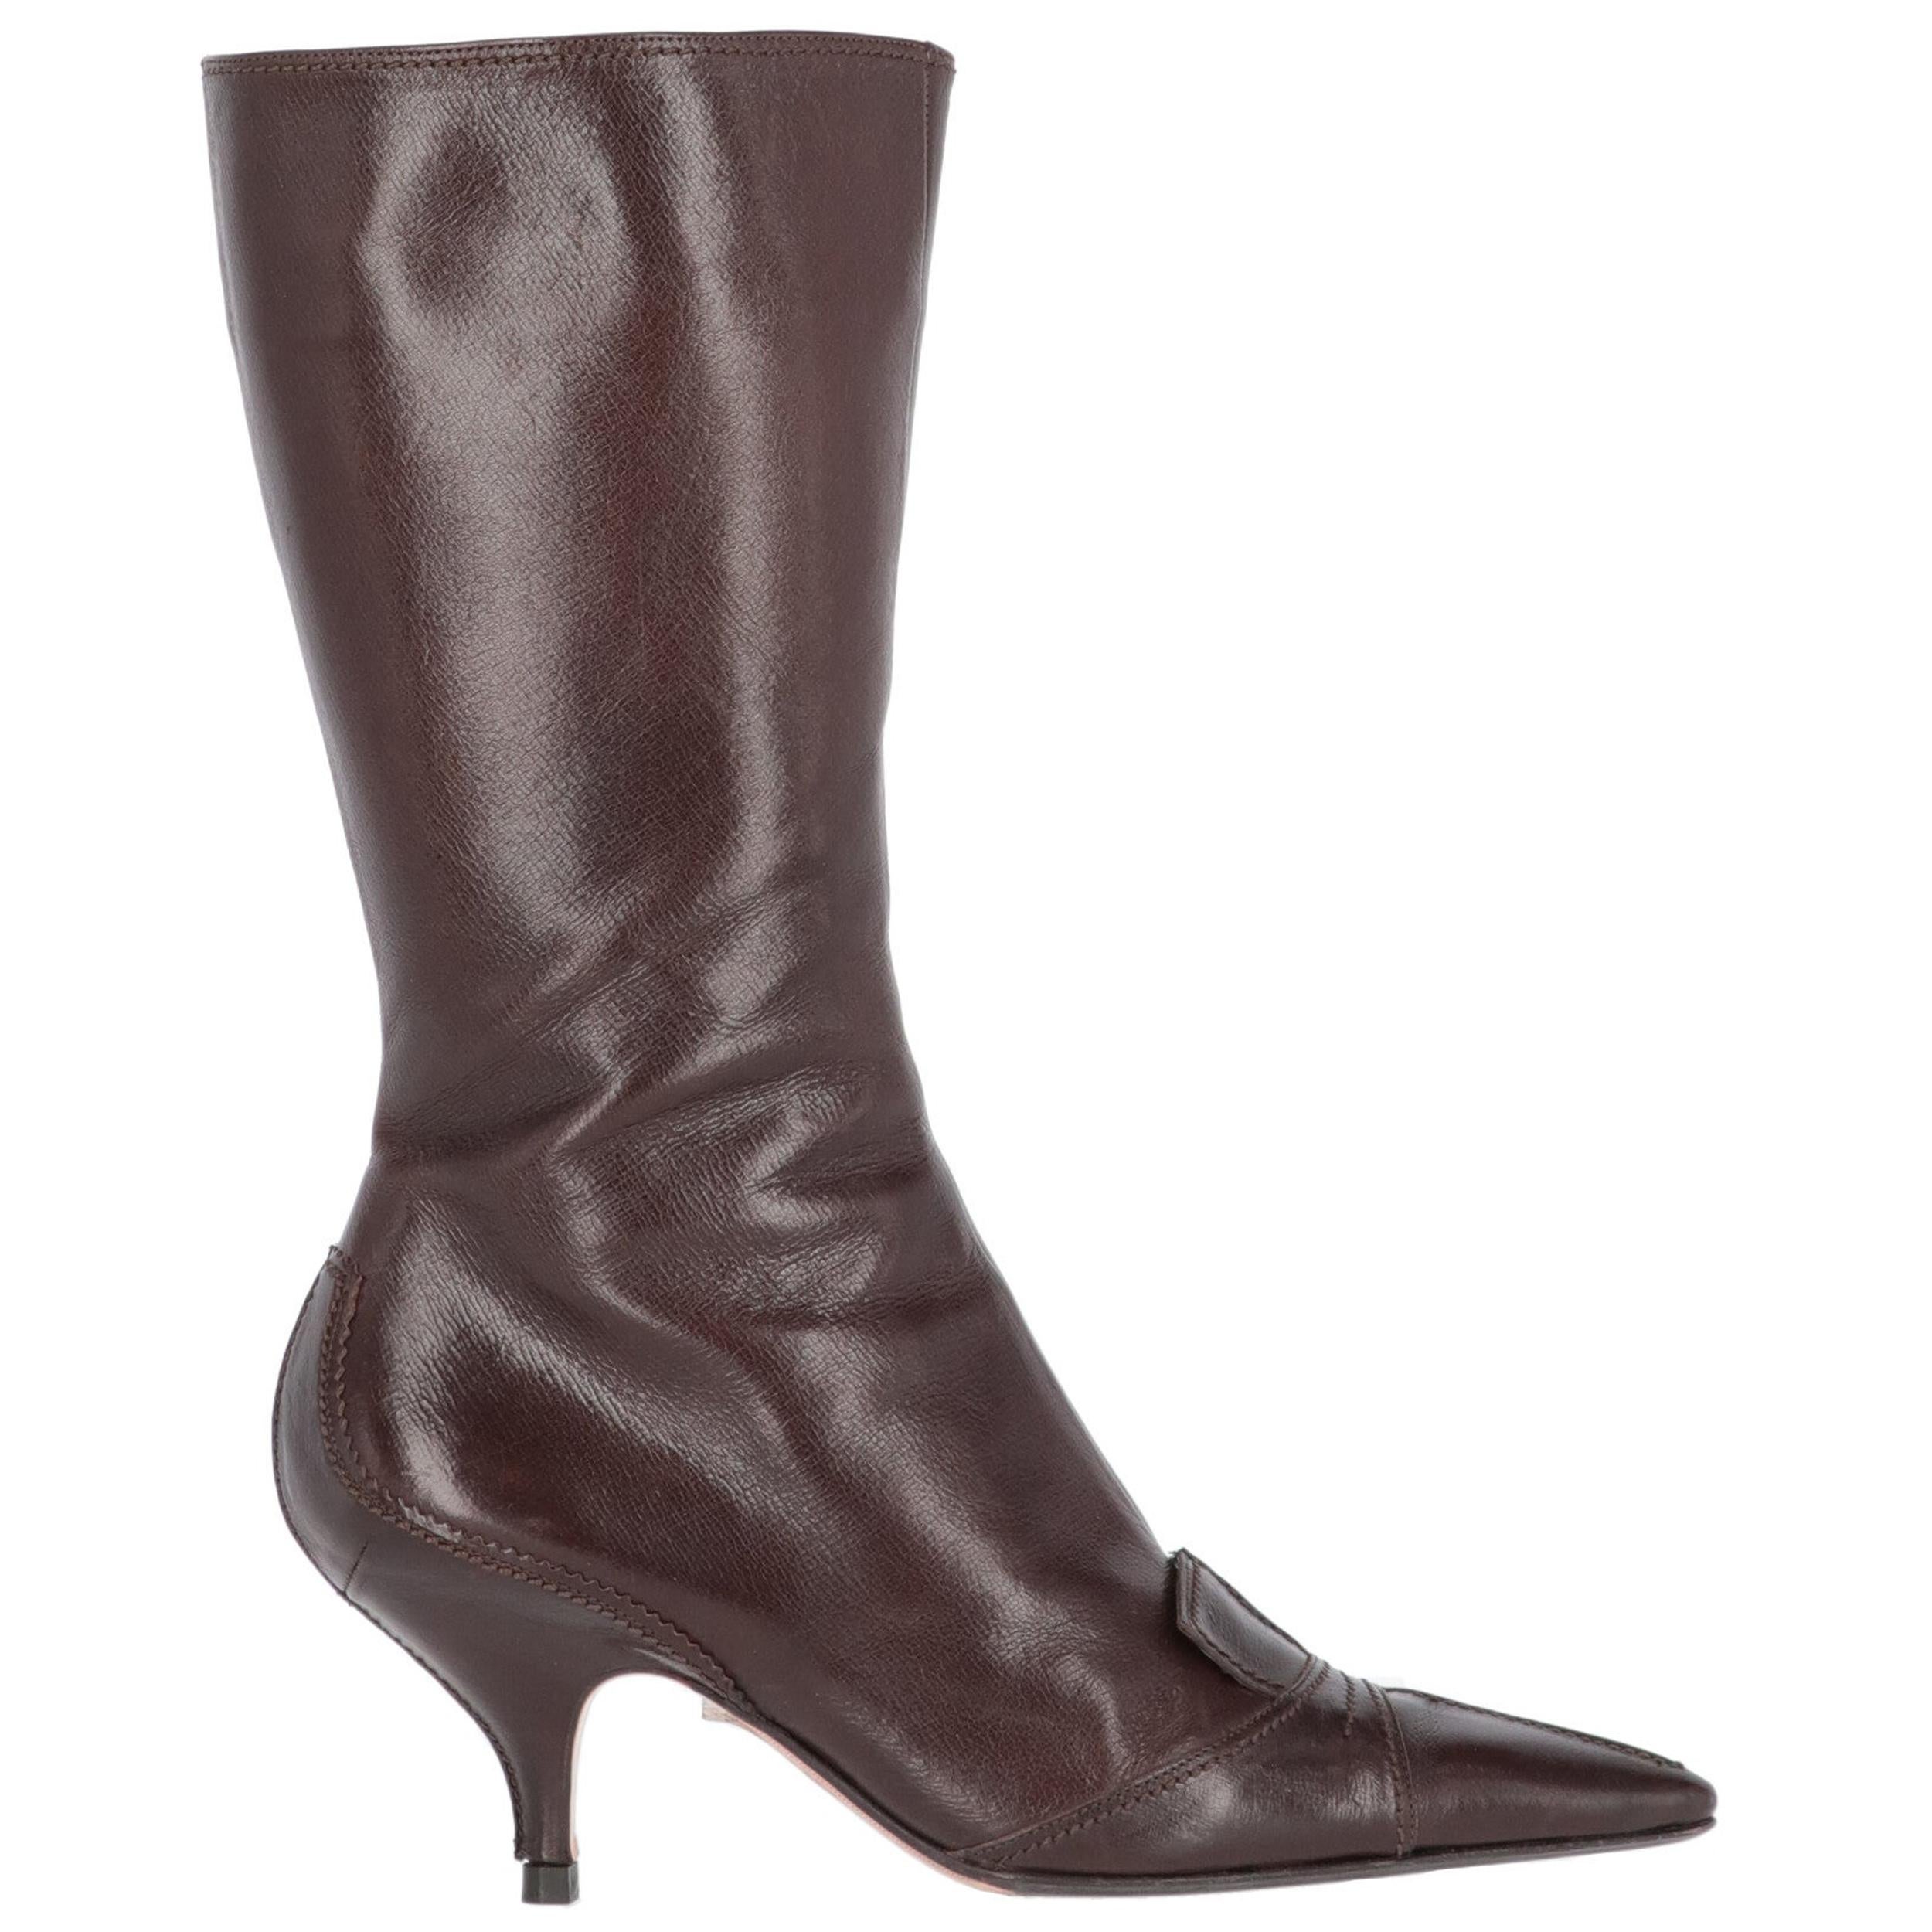 2000s Yves Saint Laurent Brown Leather Boots